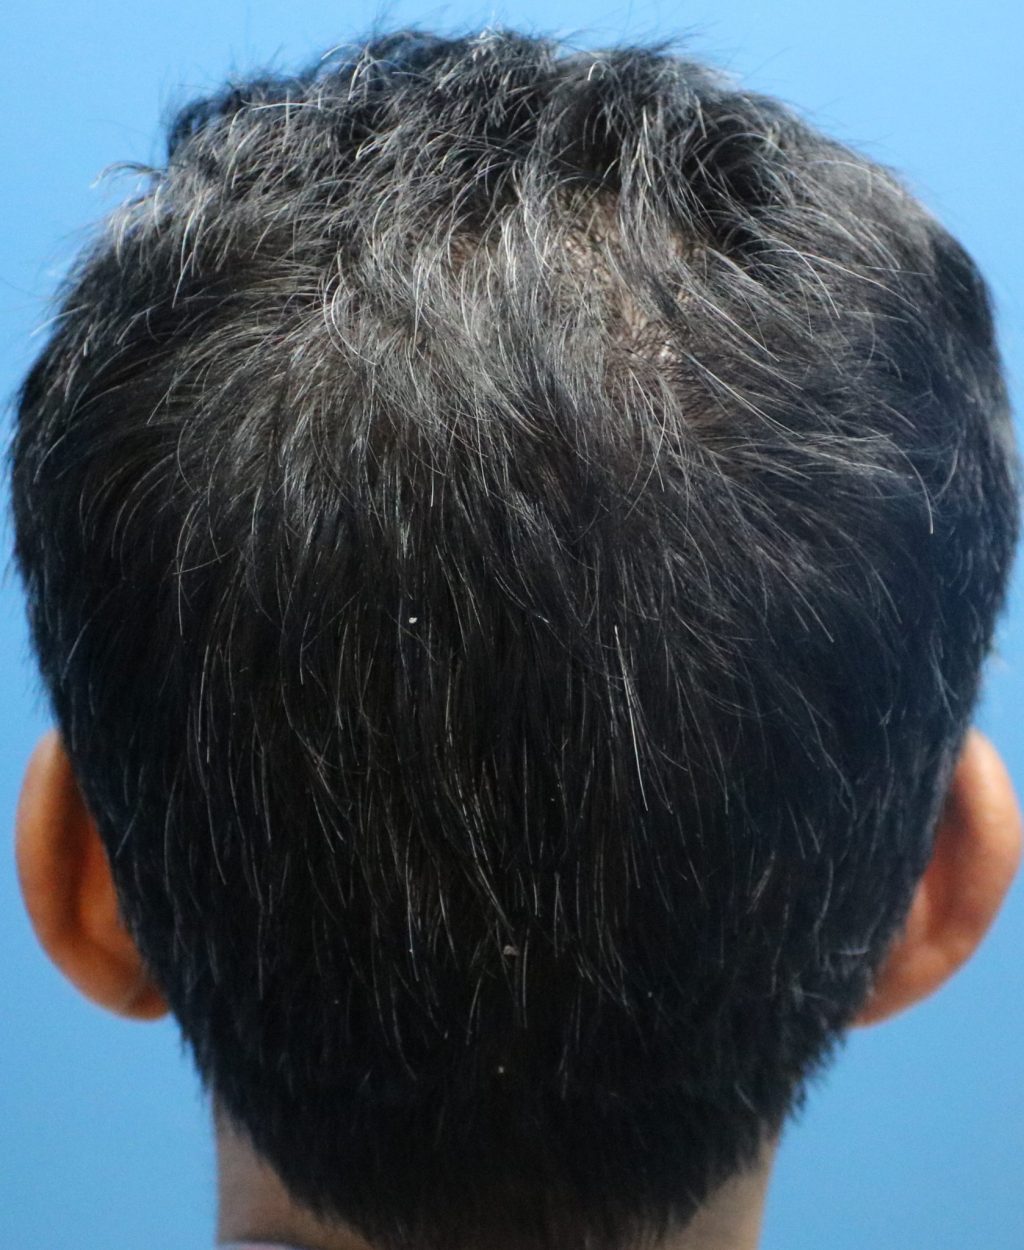 6 Months Result for Fue Male Donor Hair Transplant